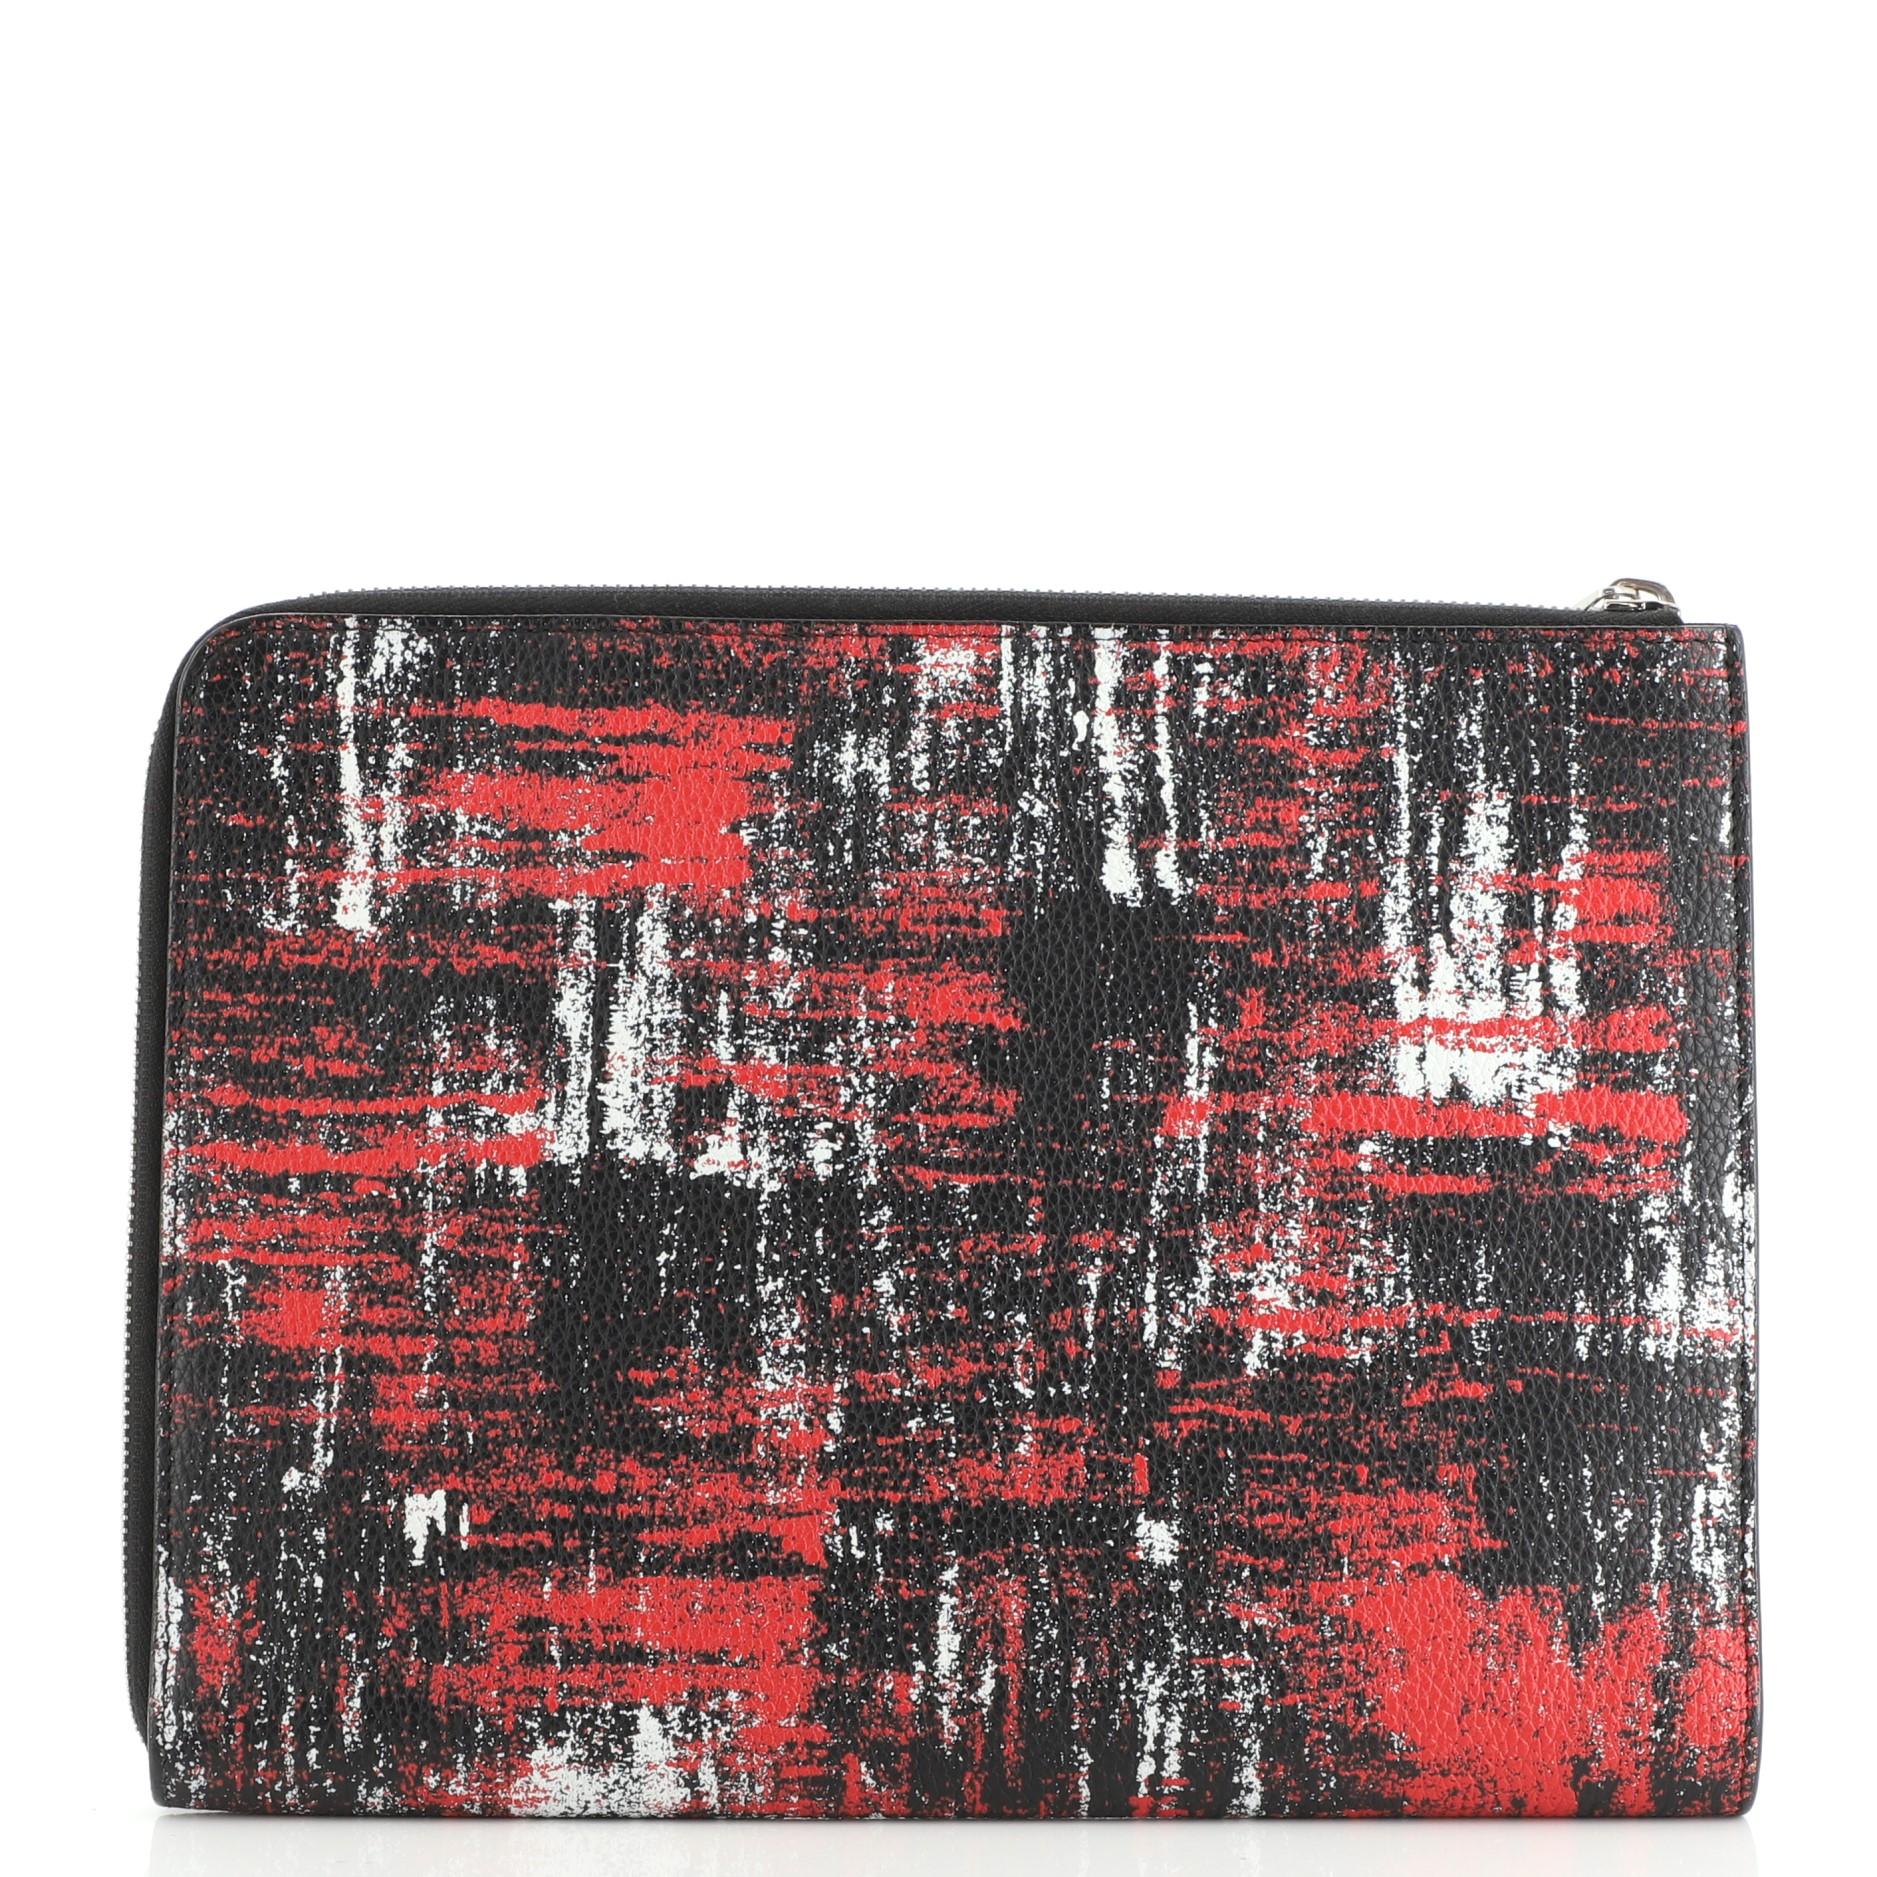 Black Christian Dior Homme Flat Clutch Printed Leather